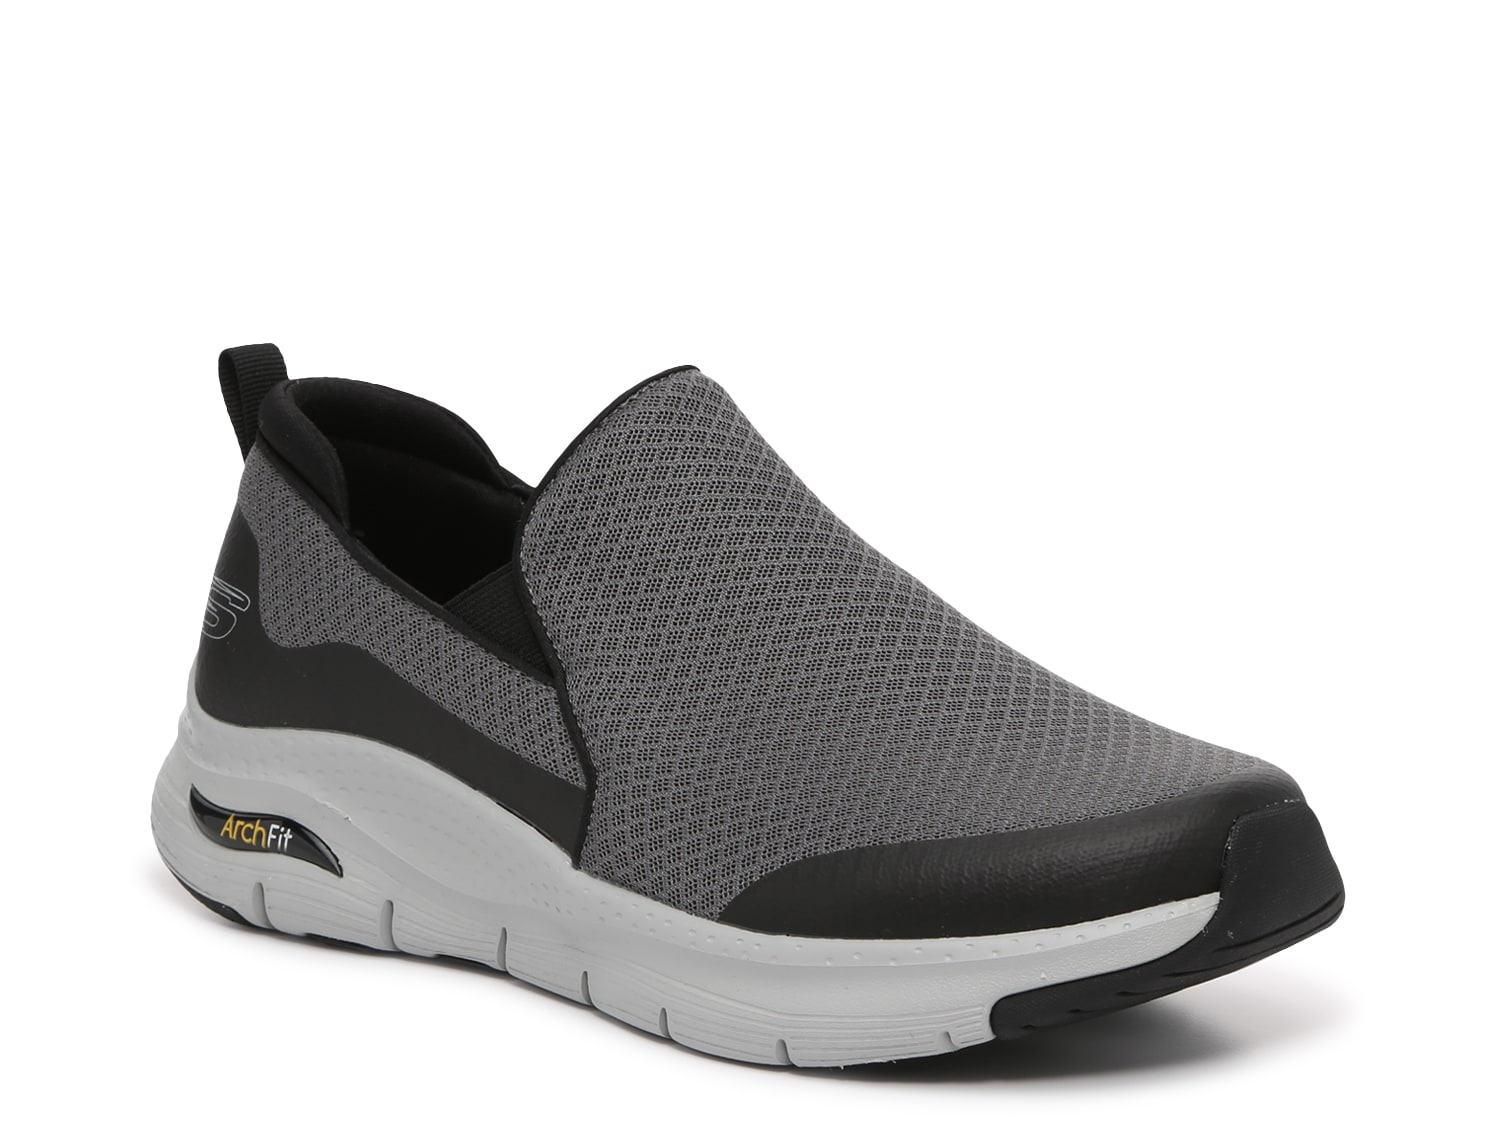 Mens Skechers Arch Fit | lupon.gov.ph